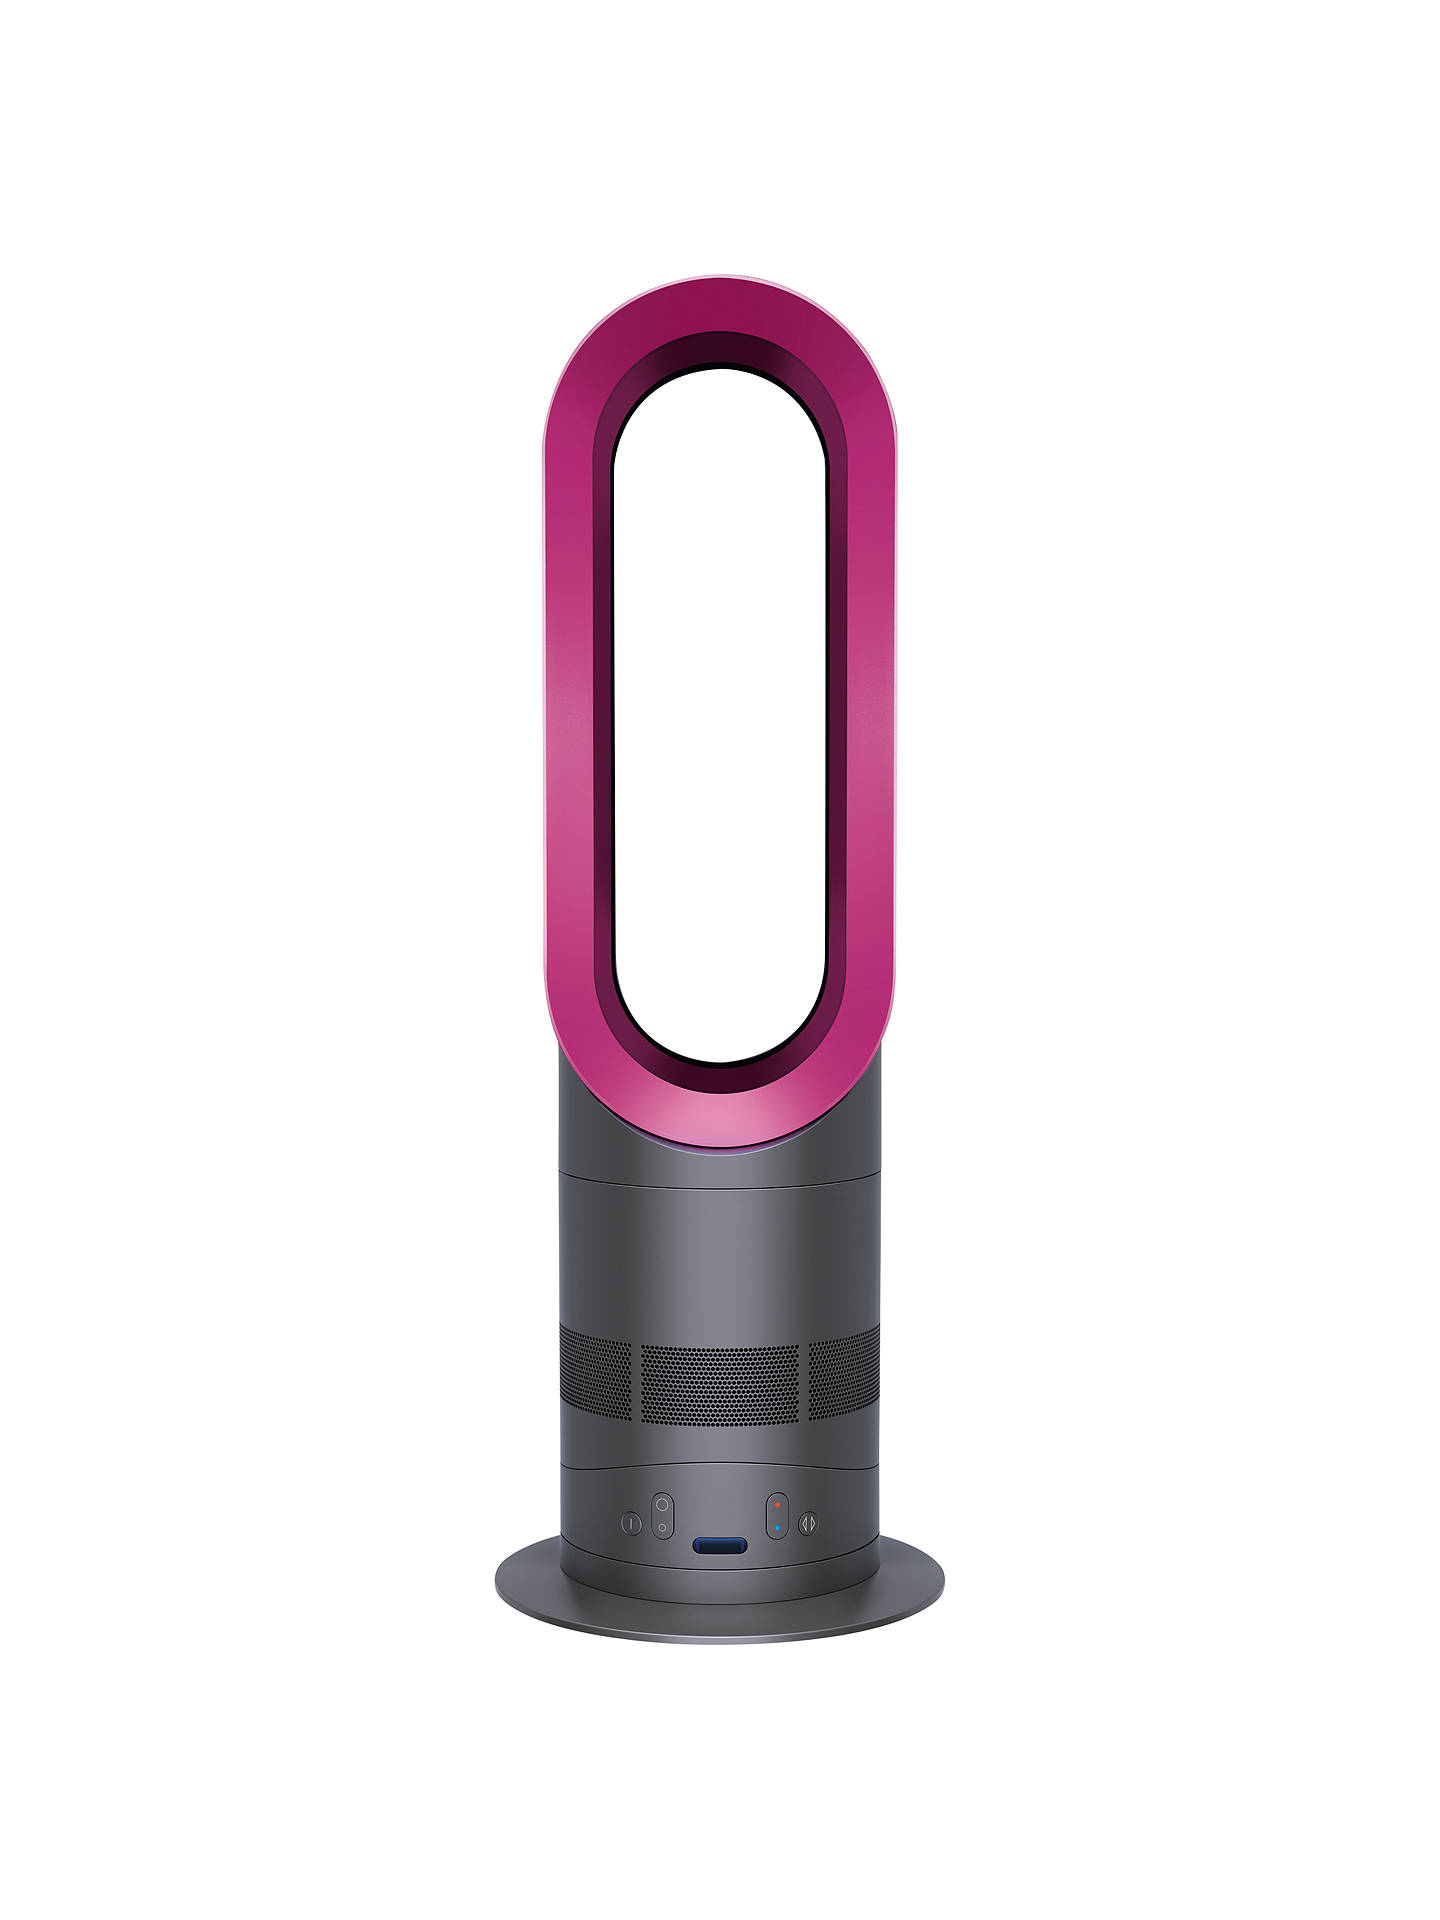 Cheapest dyson hot and cool fan